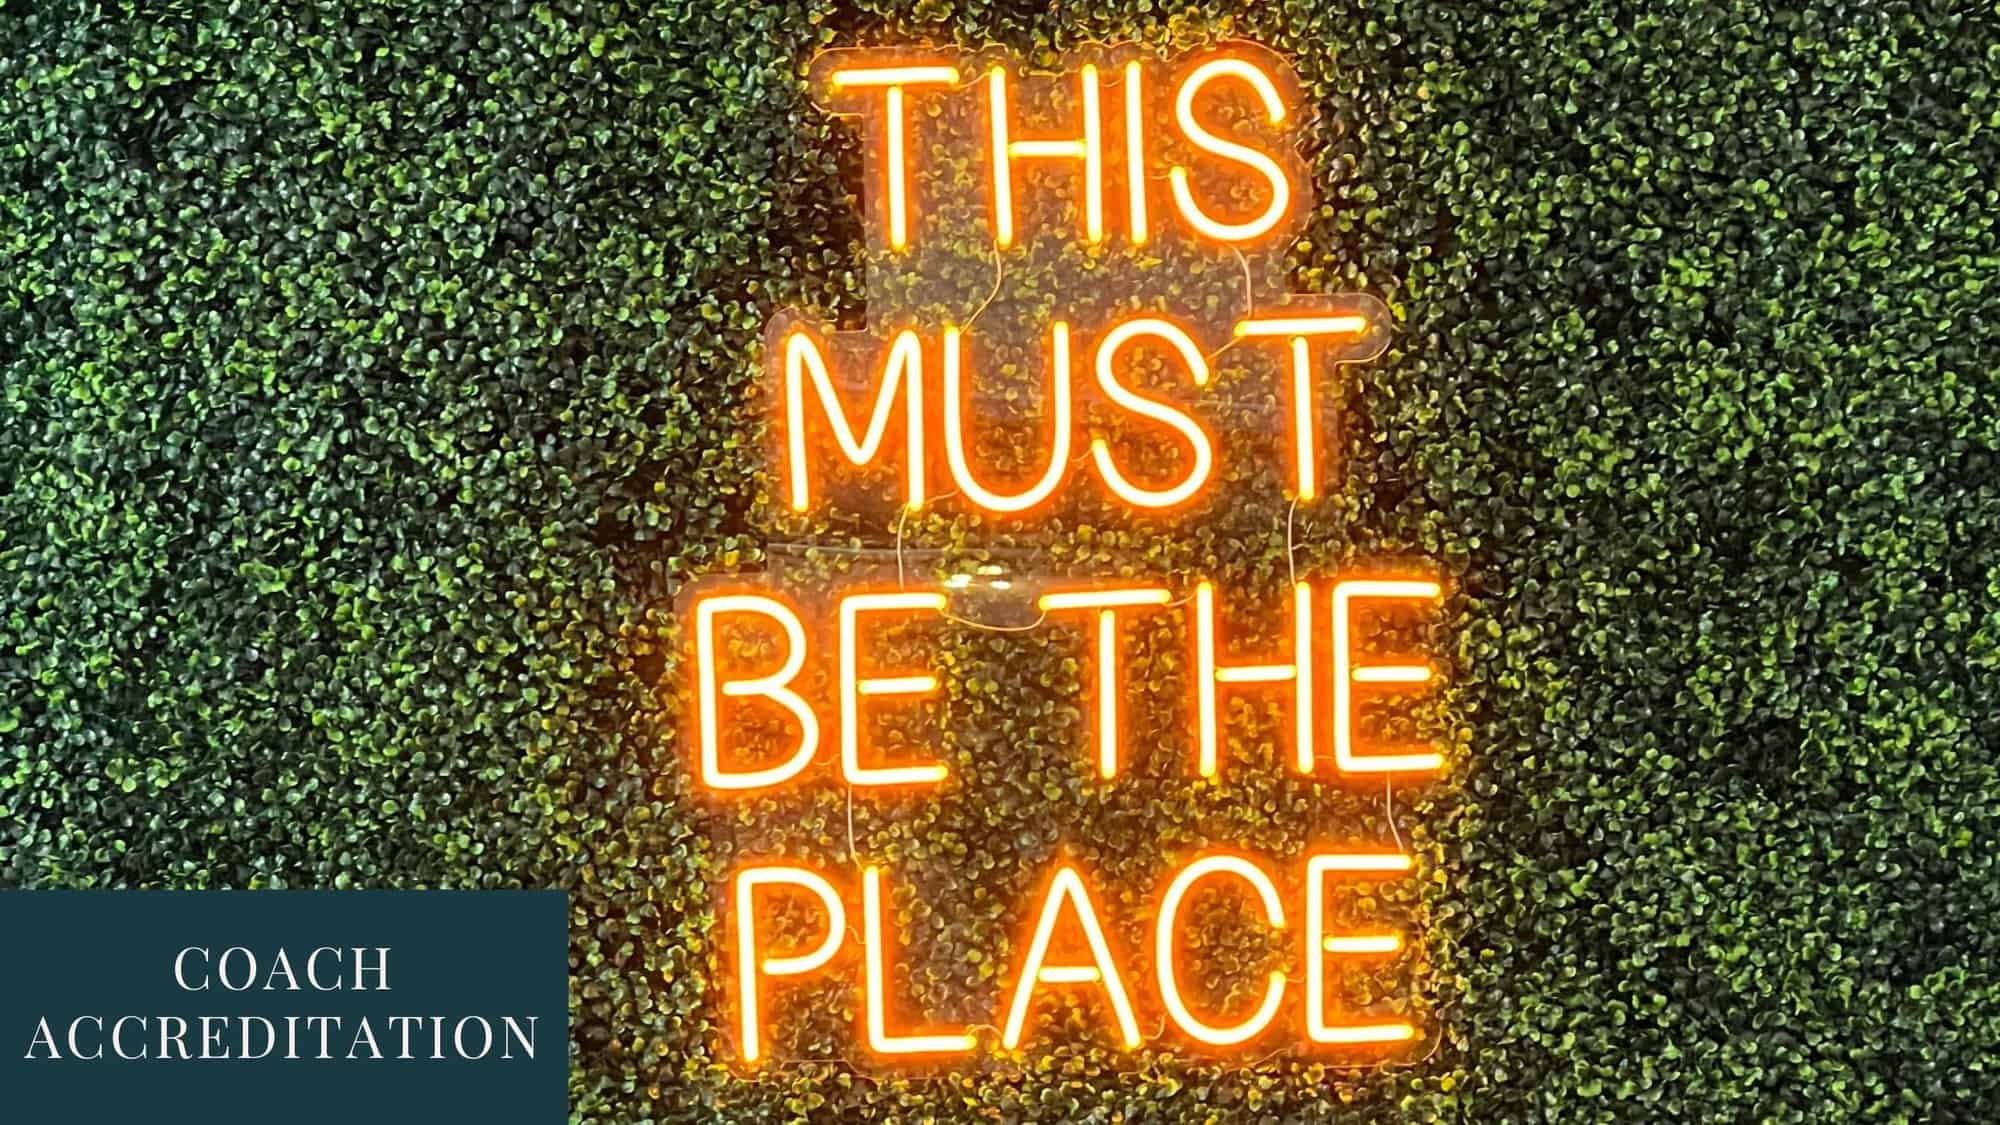 Quote: "This must be the place" in yellow neon letters against a leafy background with the words Coach Accreditation in a blue square